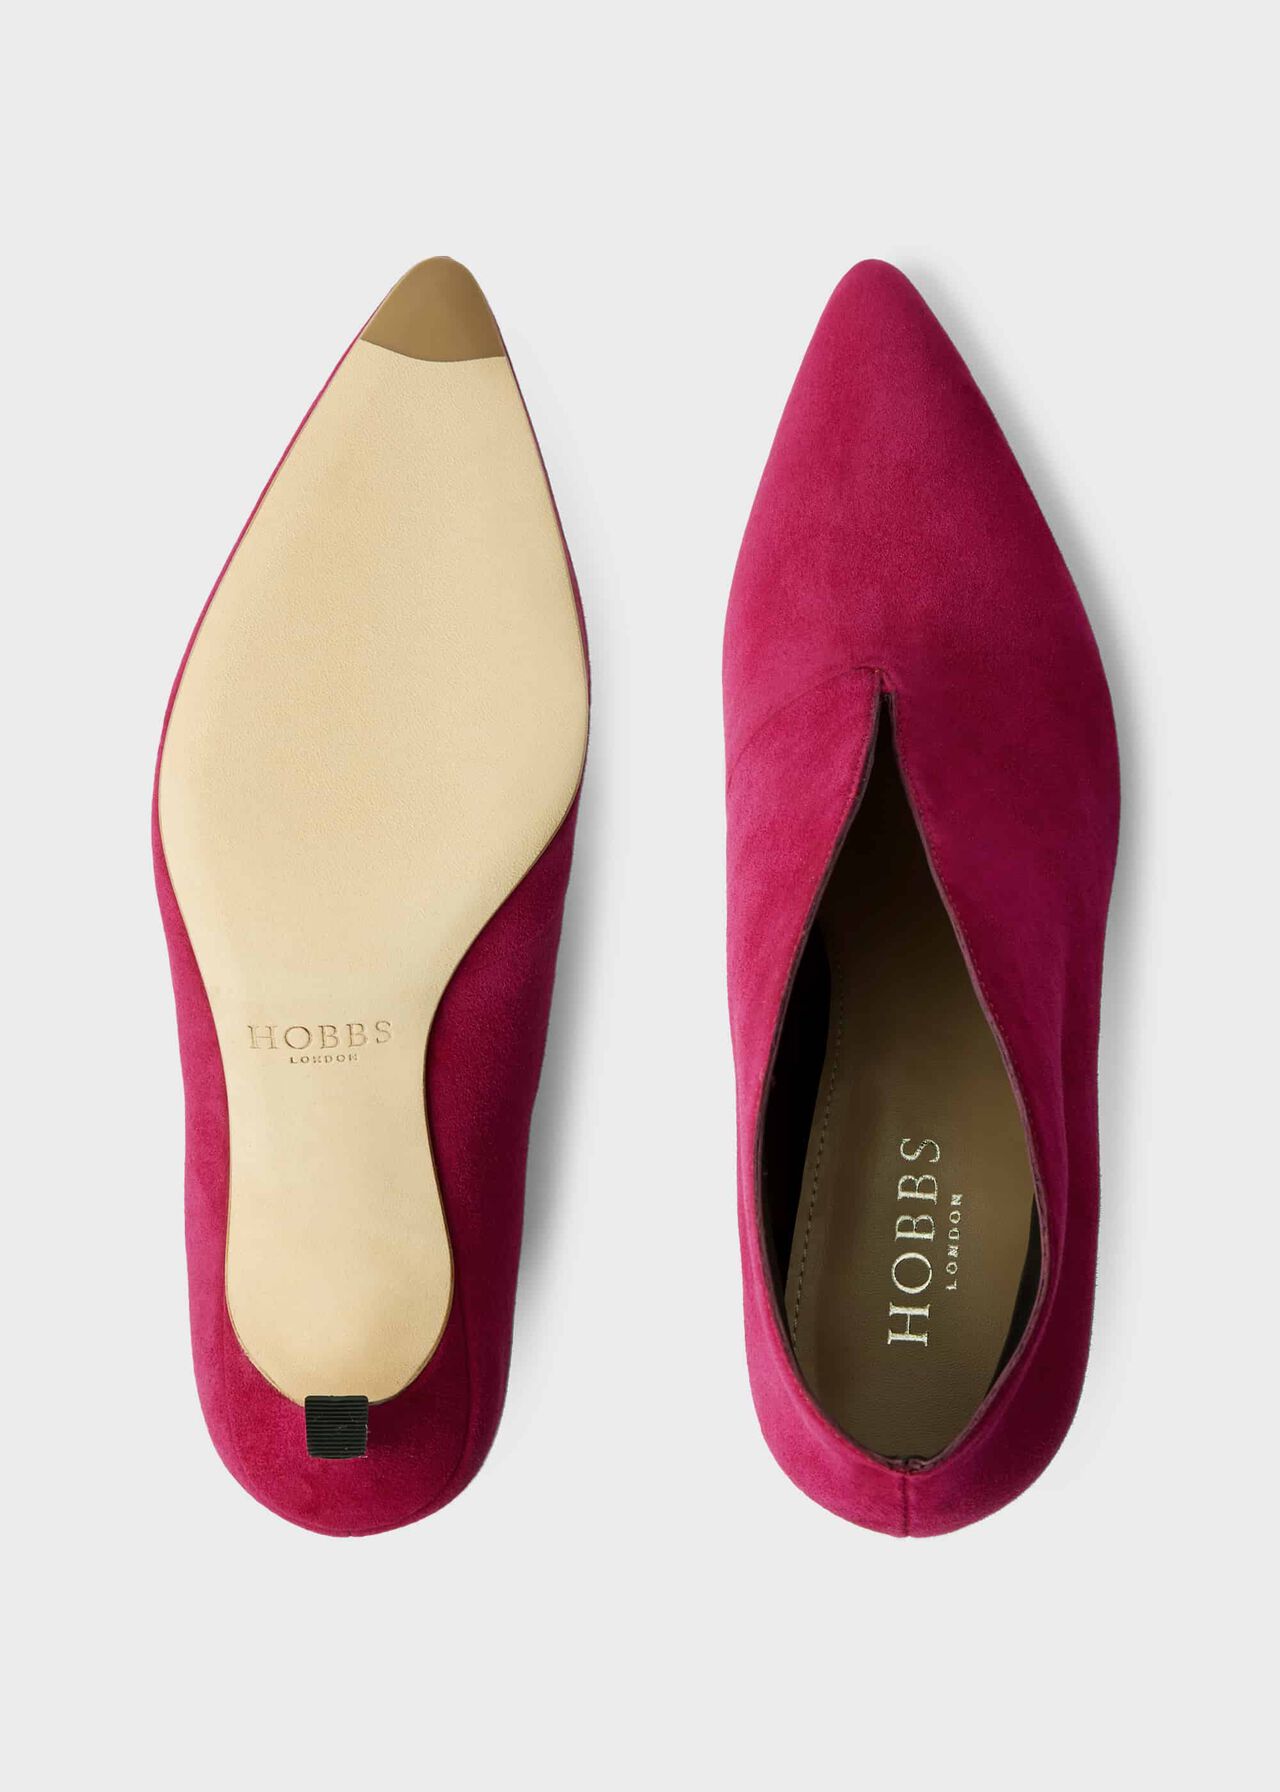 Sienna Ankle Boots, Raspberry, hi-res